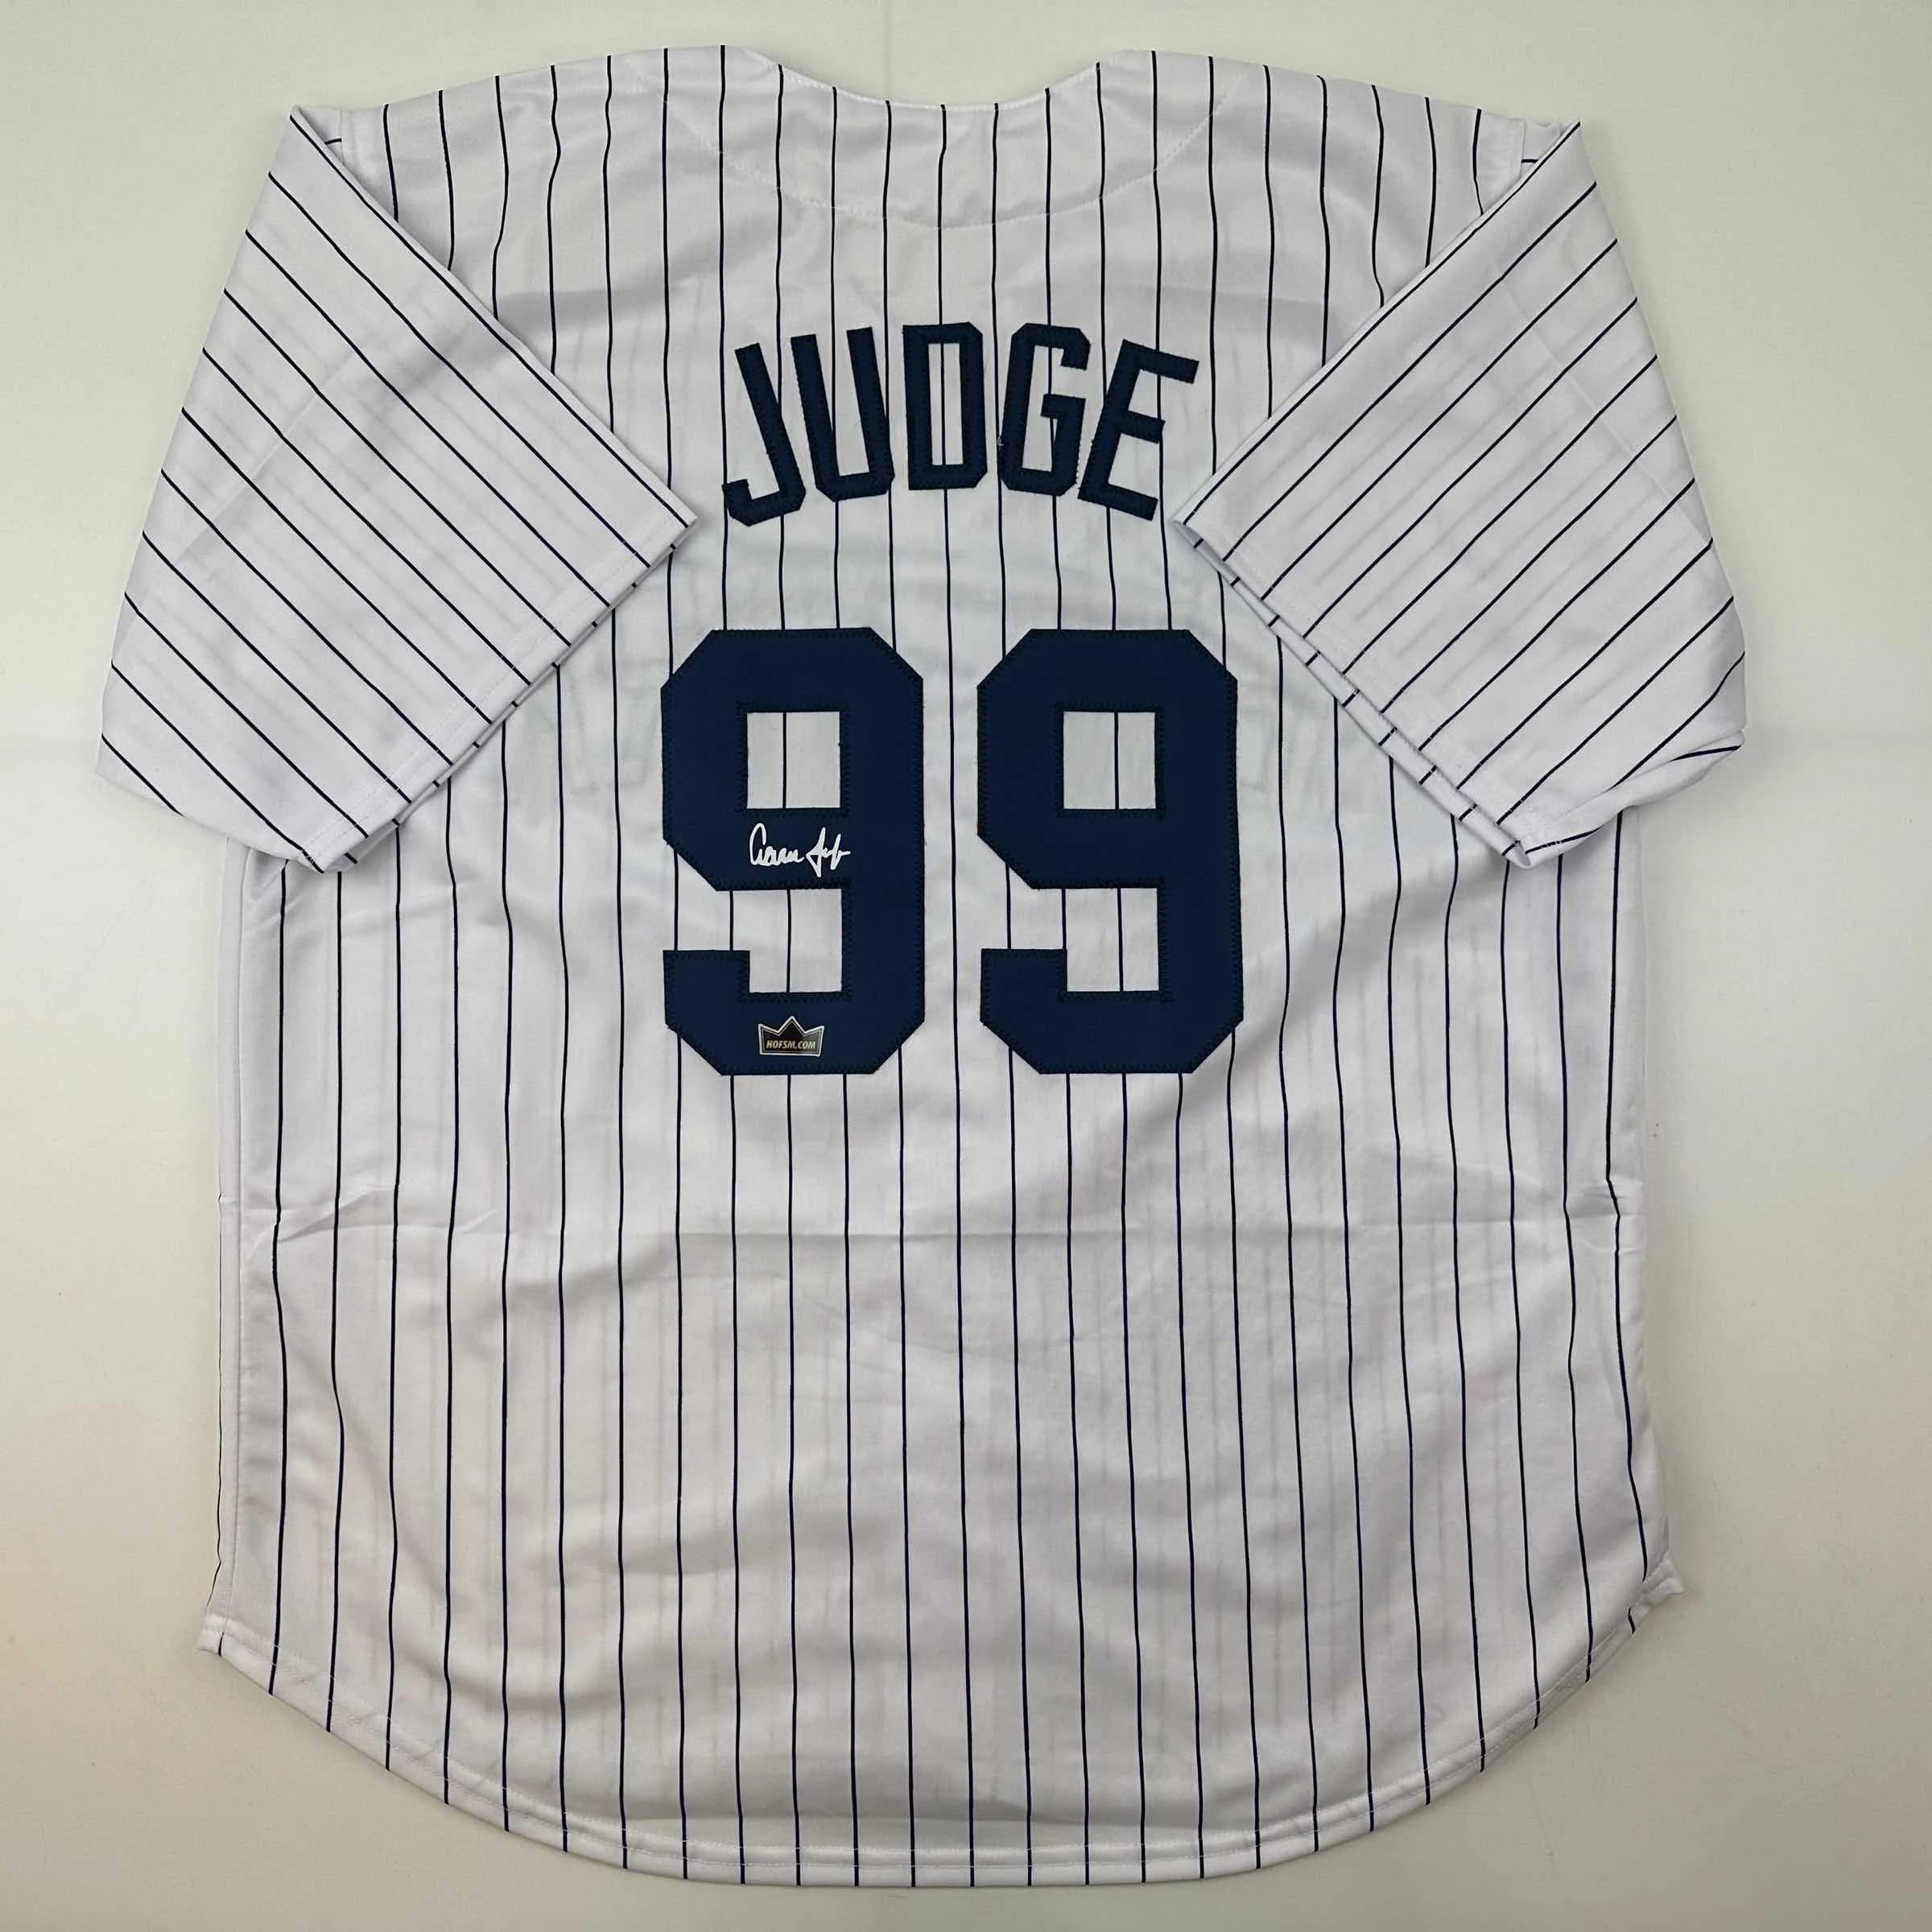 signed judge jersey